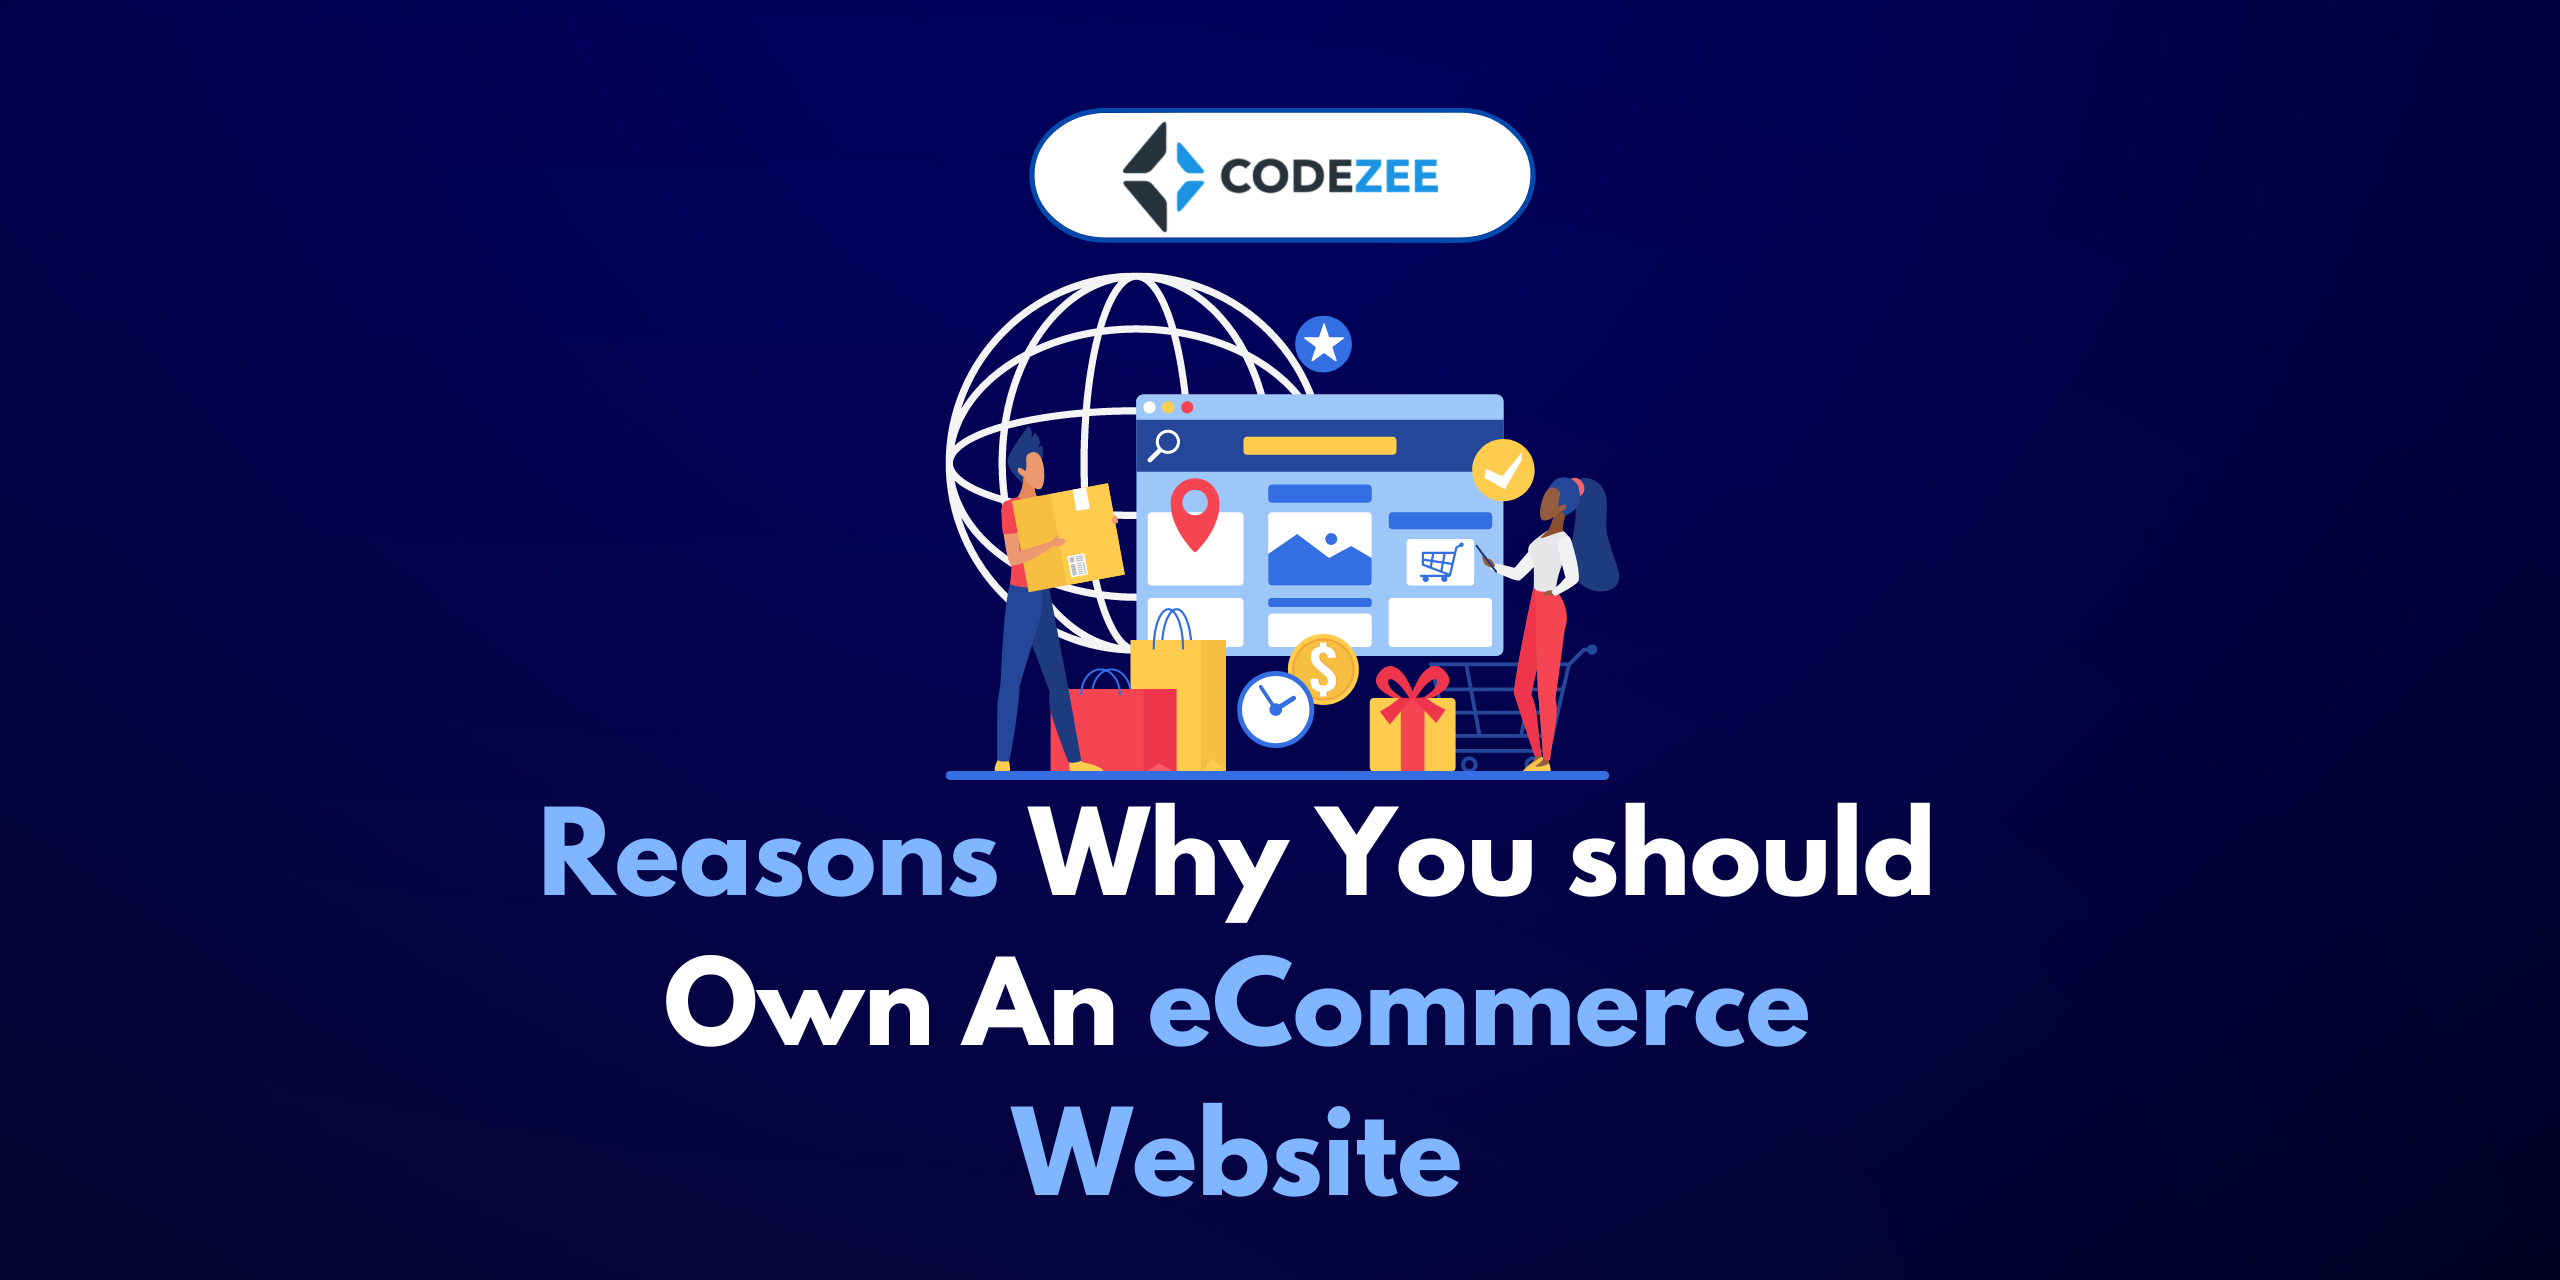 10 Compelling Reasons Why You Should Own an eCommerce Website